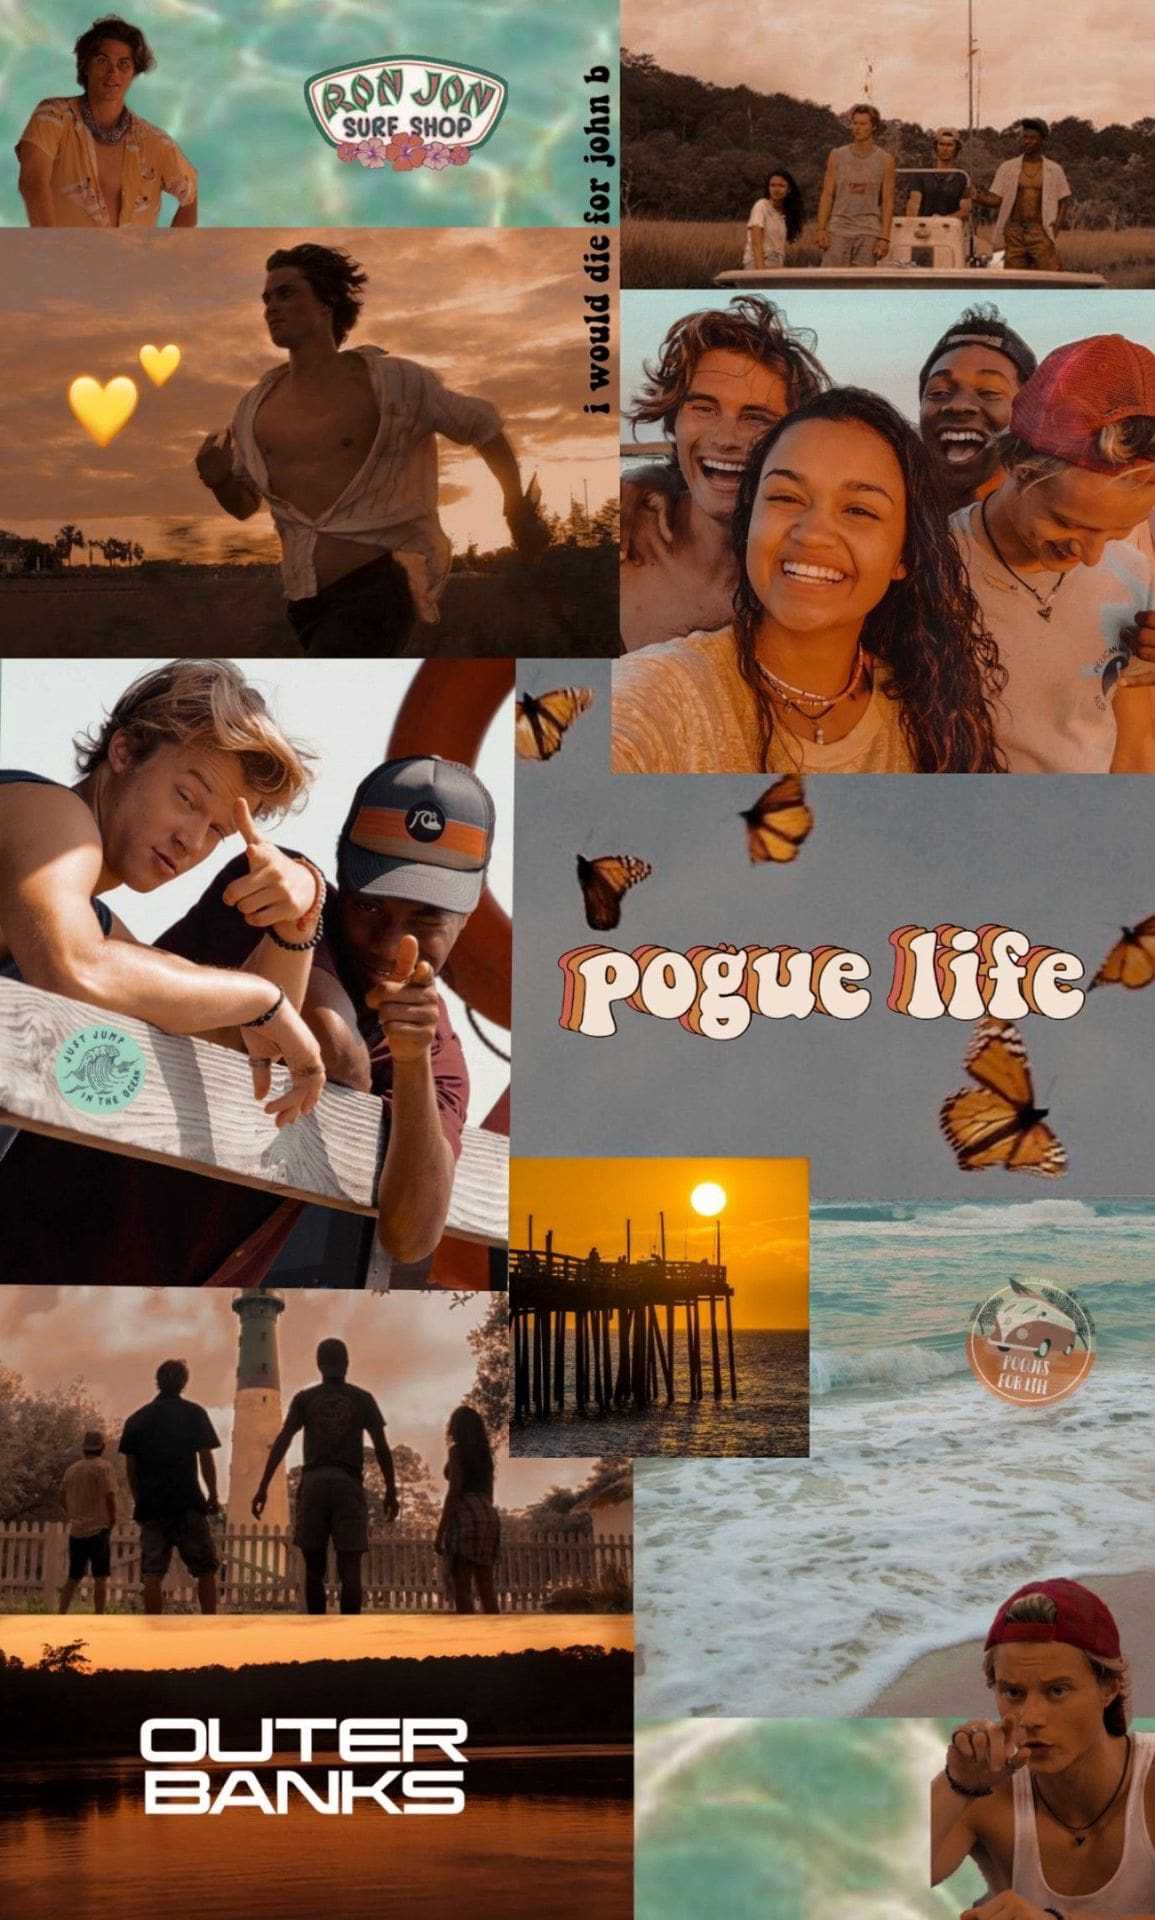 Poguelife aesthetic wallpaper, for all those who love the show - Netflix